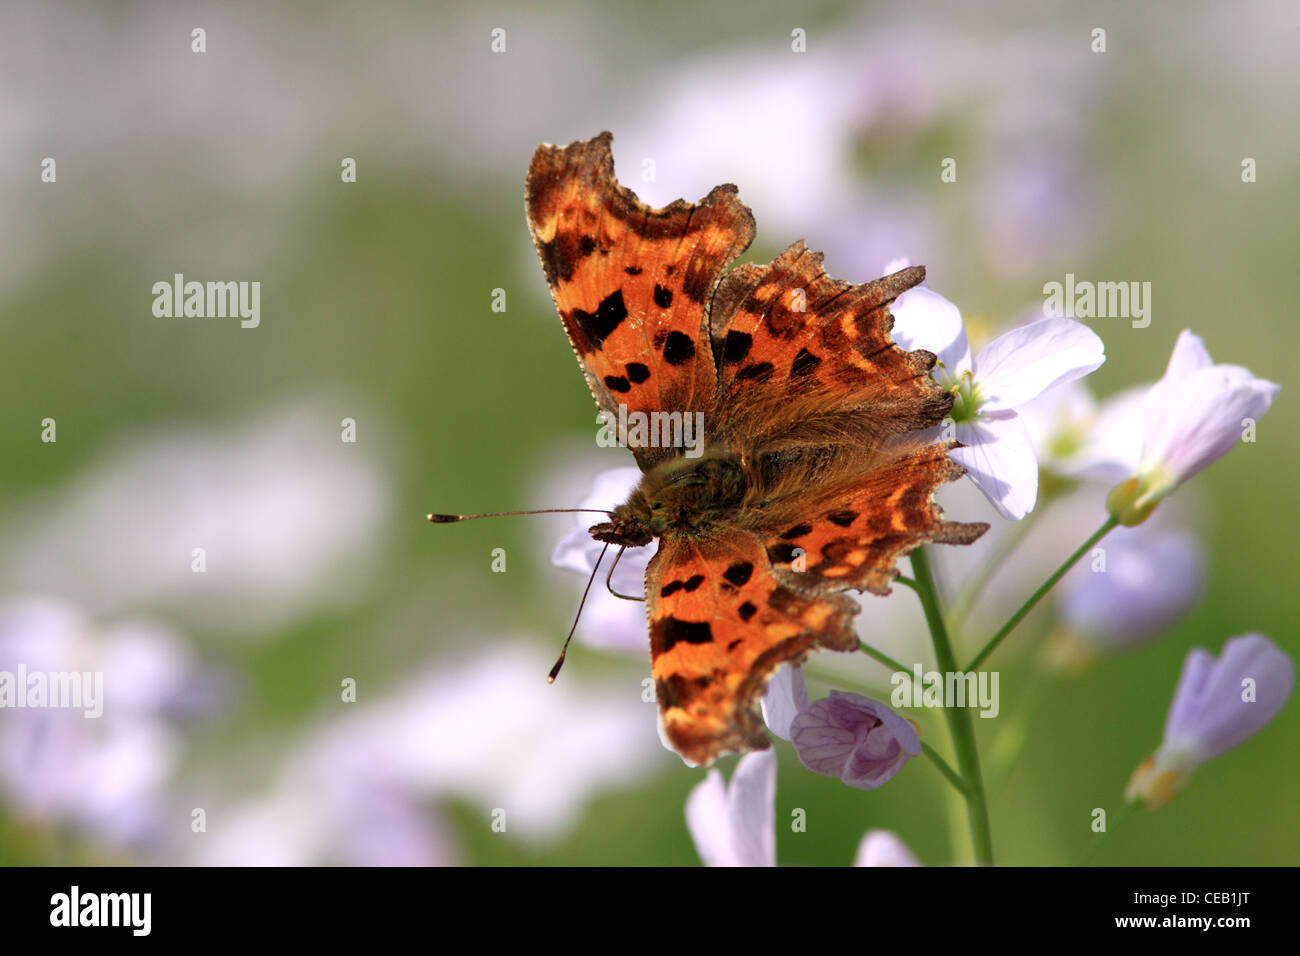 Comma ( Polygonia c-album ) butterfly on Lady's Smock ( Cruciferae or Brassicaccae ) wild flower Stock Photo